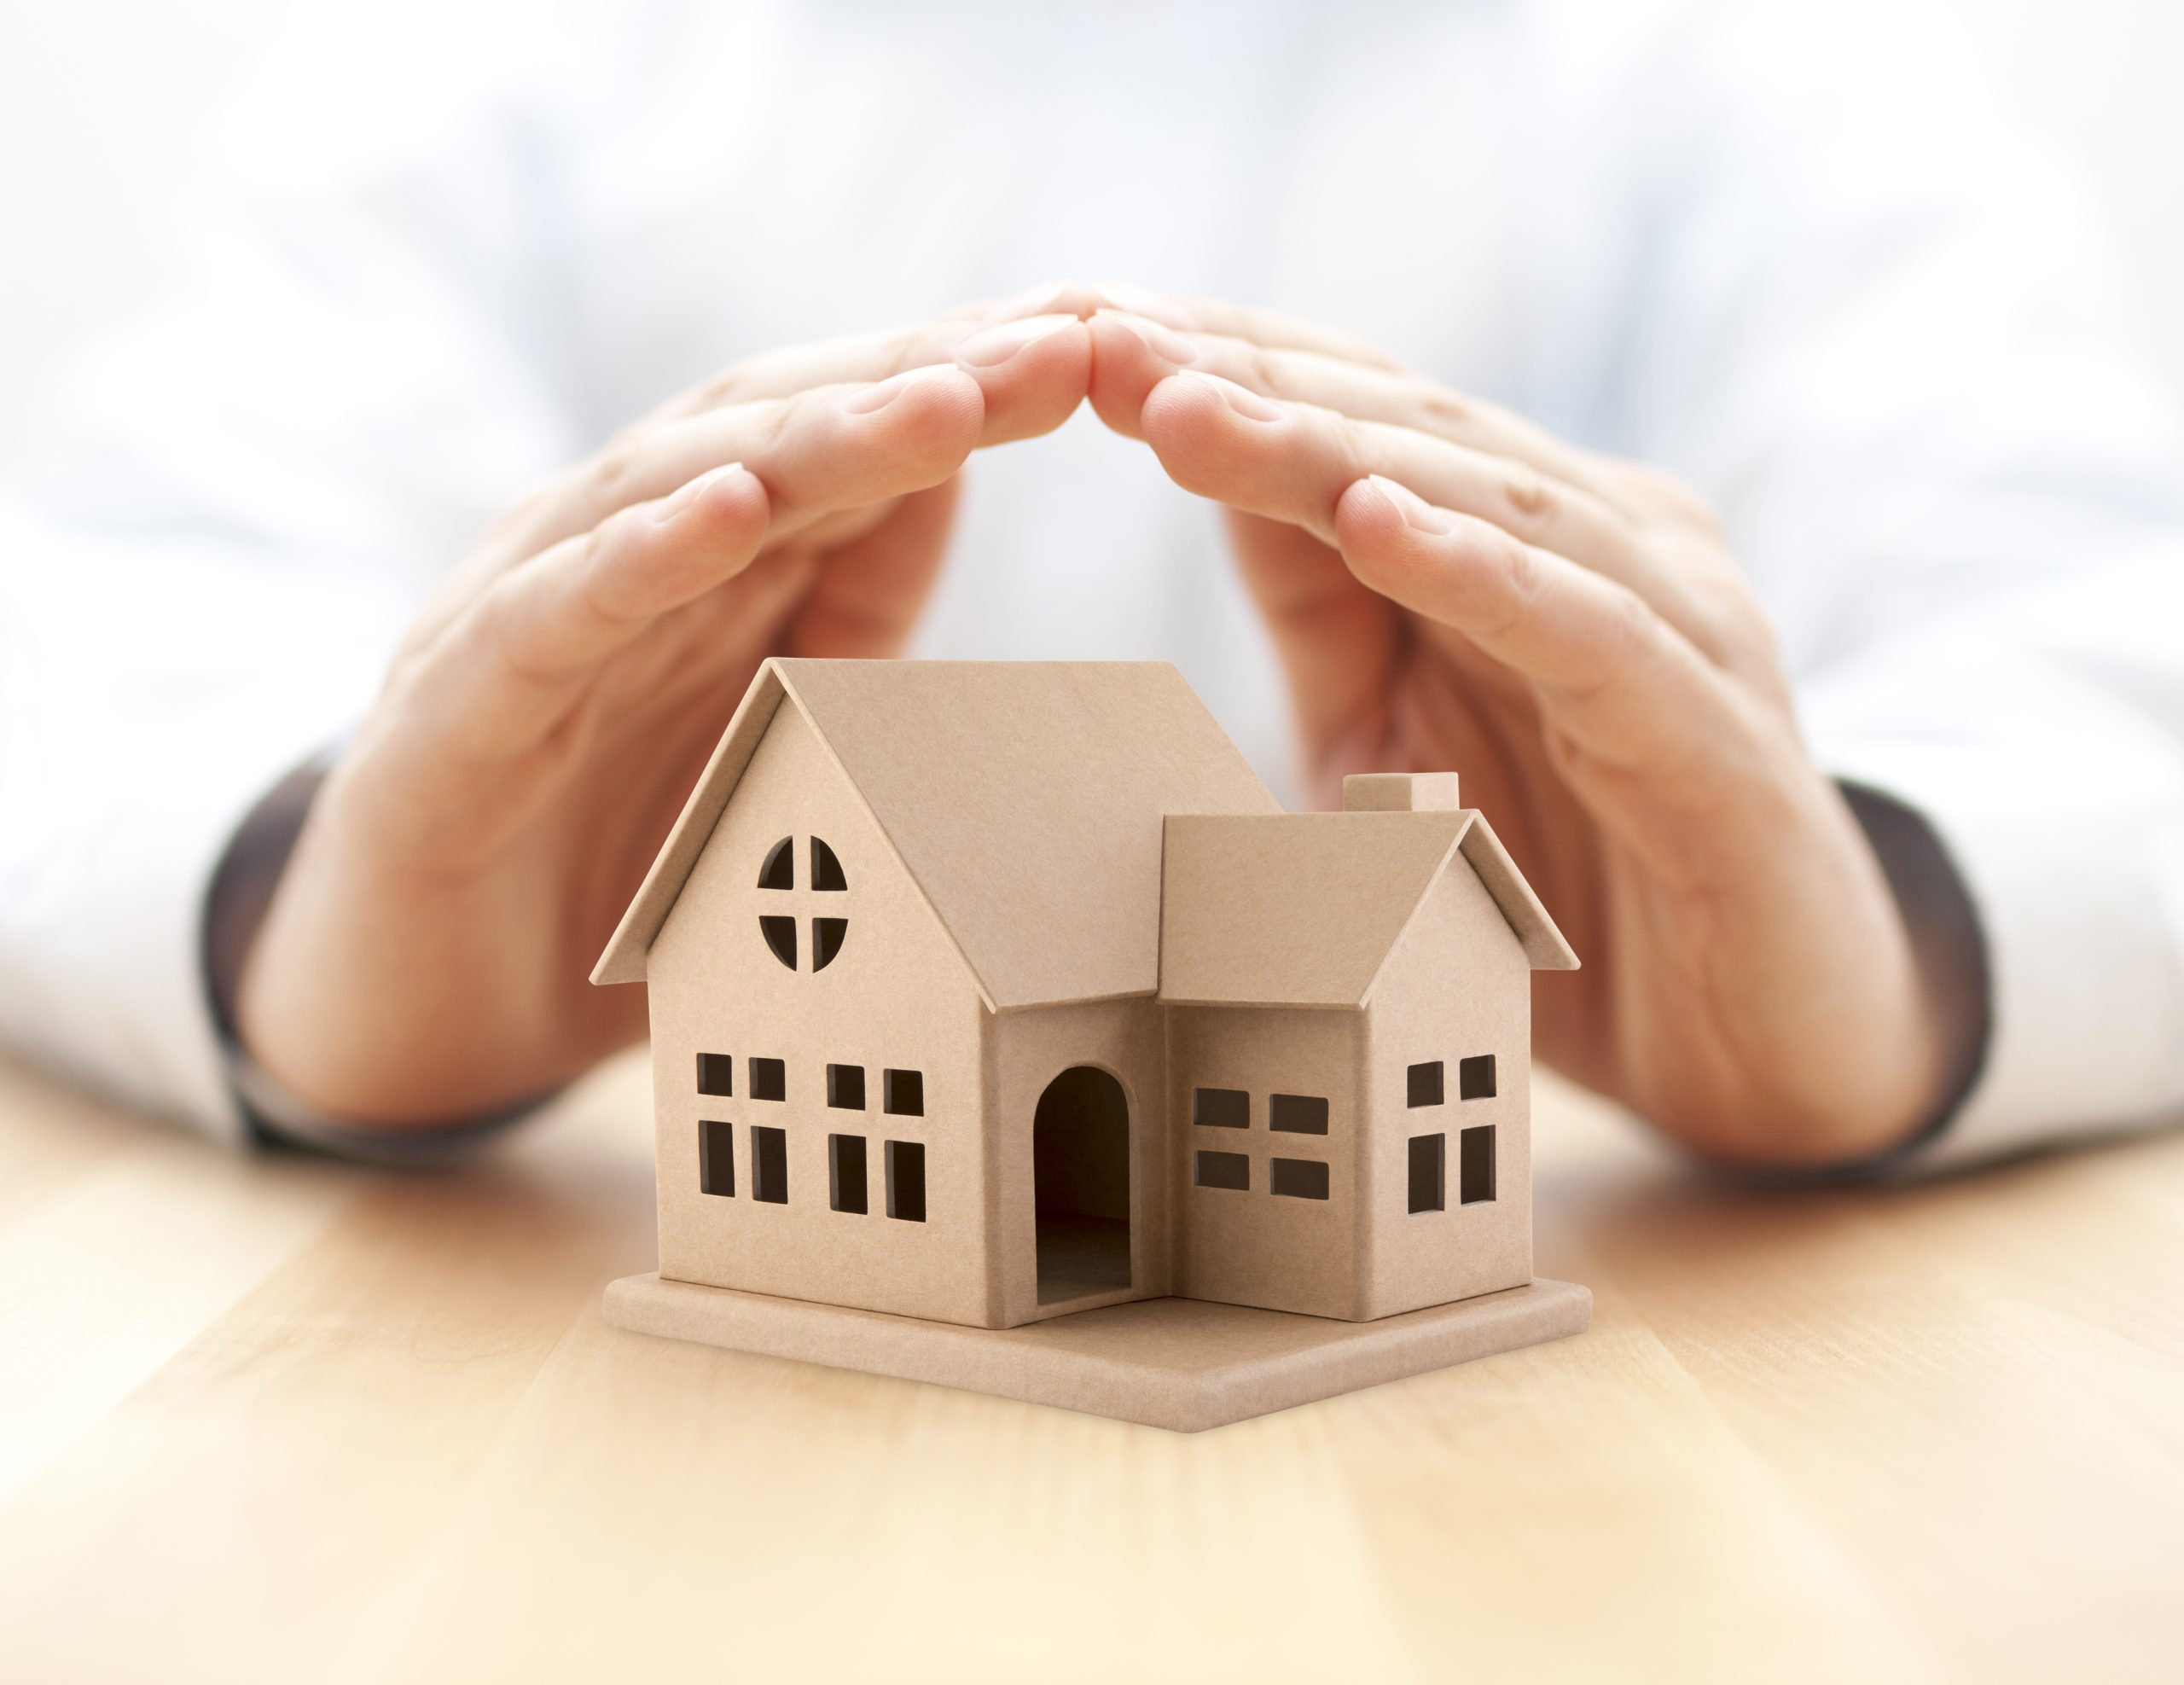 Strategies for Lowering Home Insurance Premiums